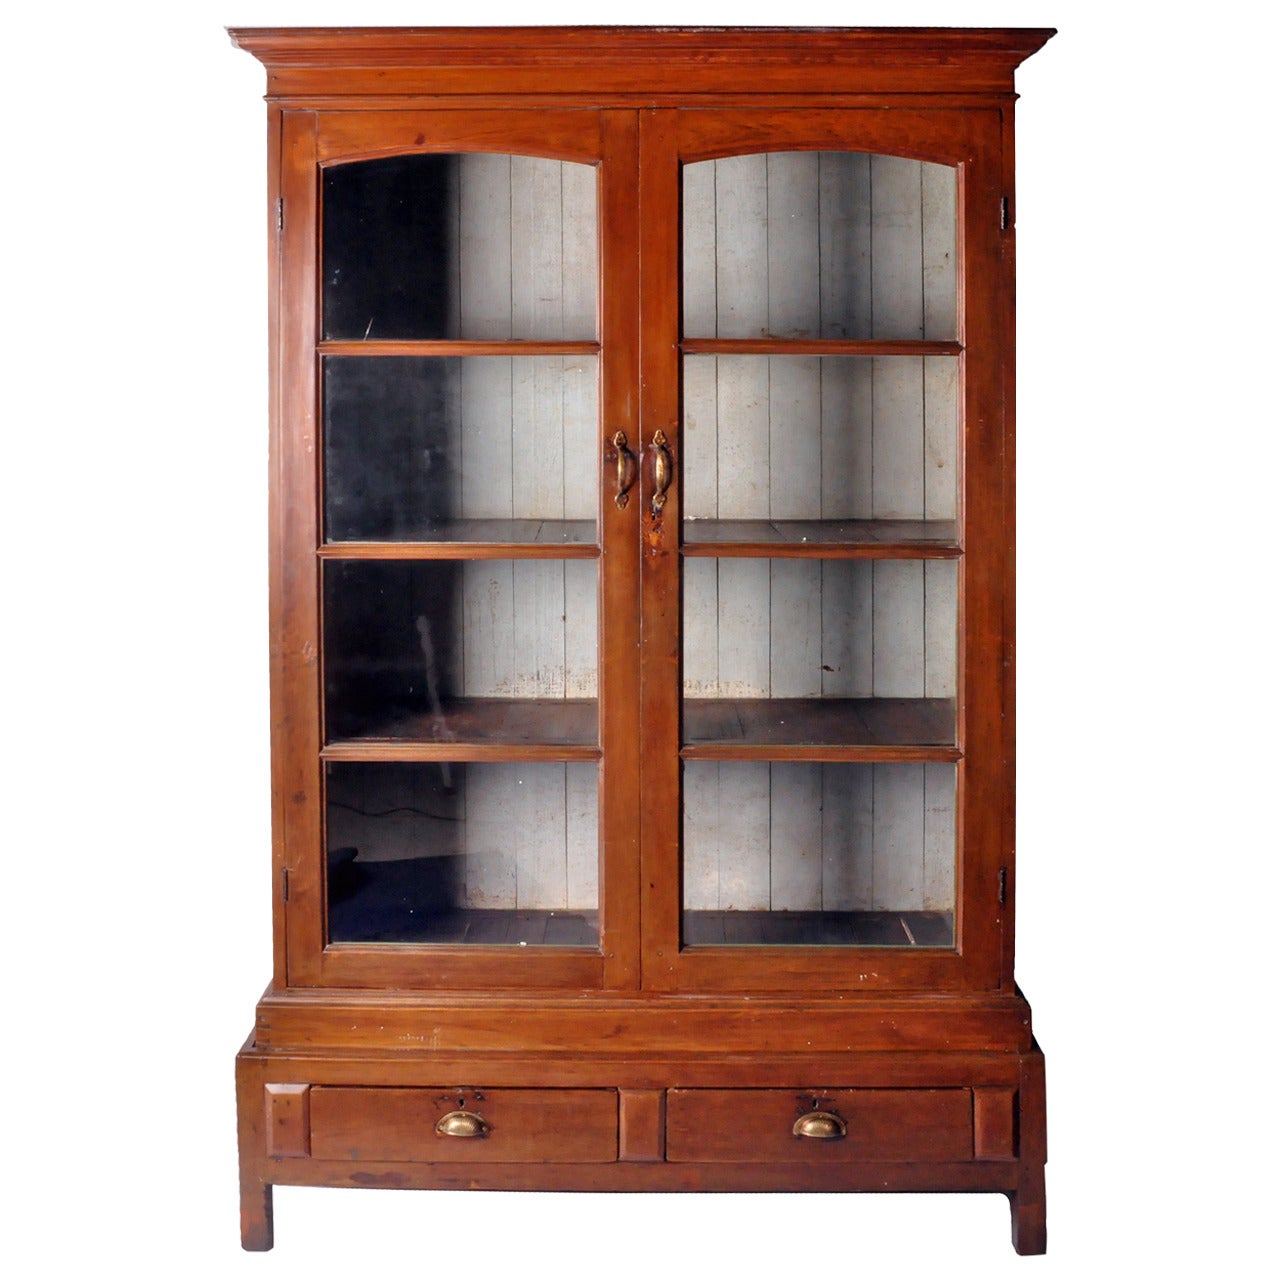 British Colonial Display Cabinet with Two Drawers